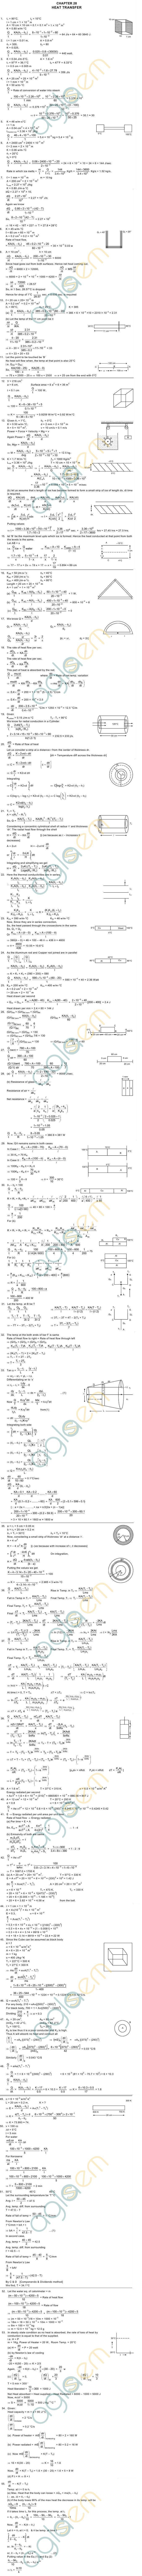 HC Verma Solutions: Chapter 28 - Heat Transfer